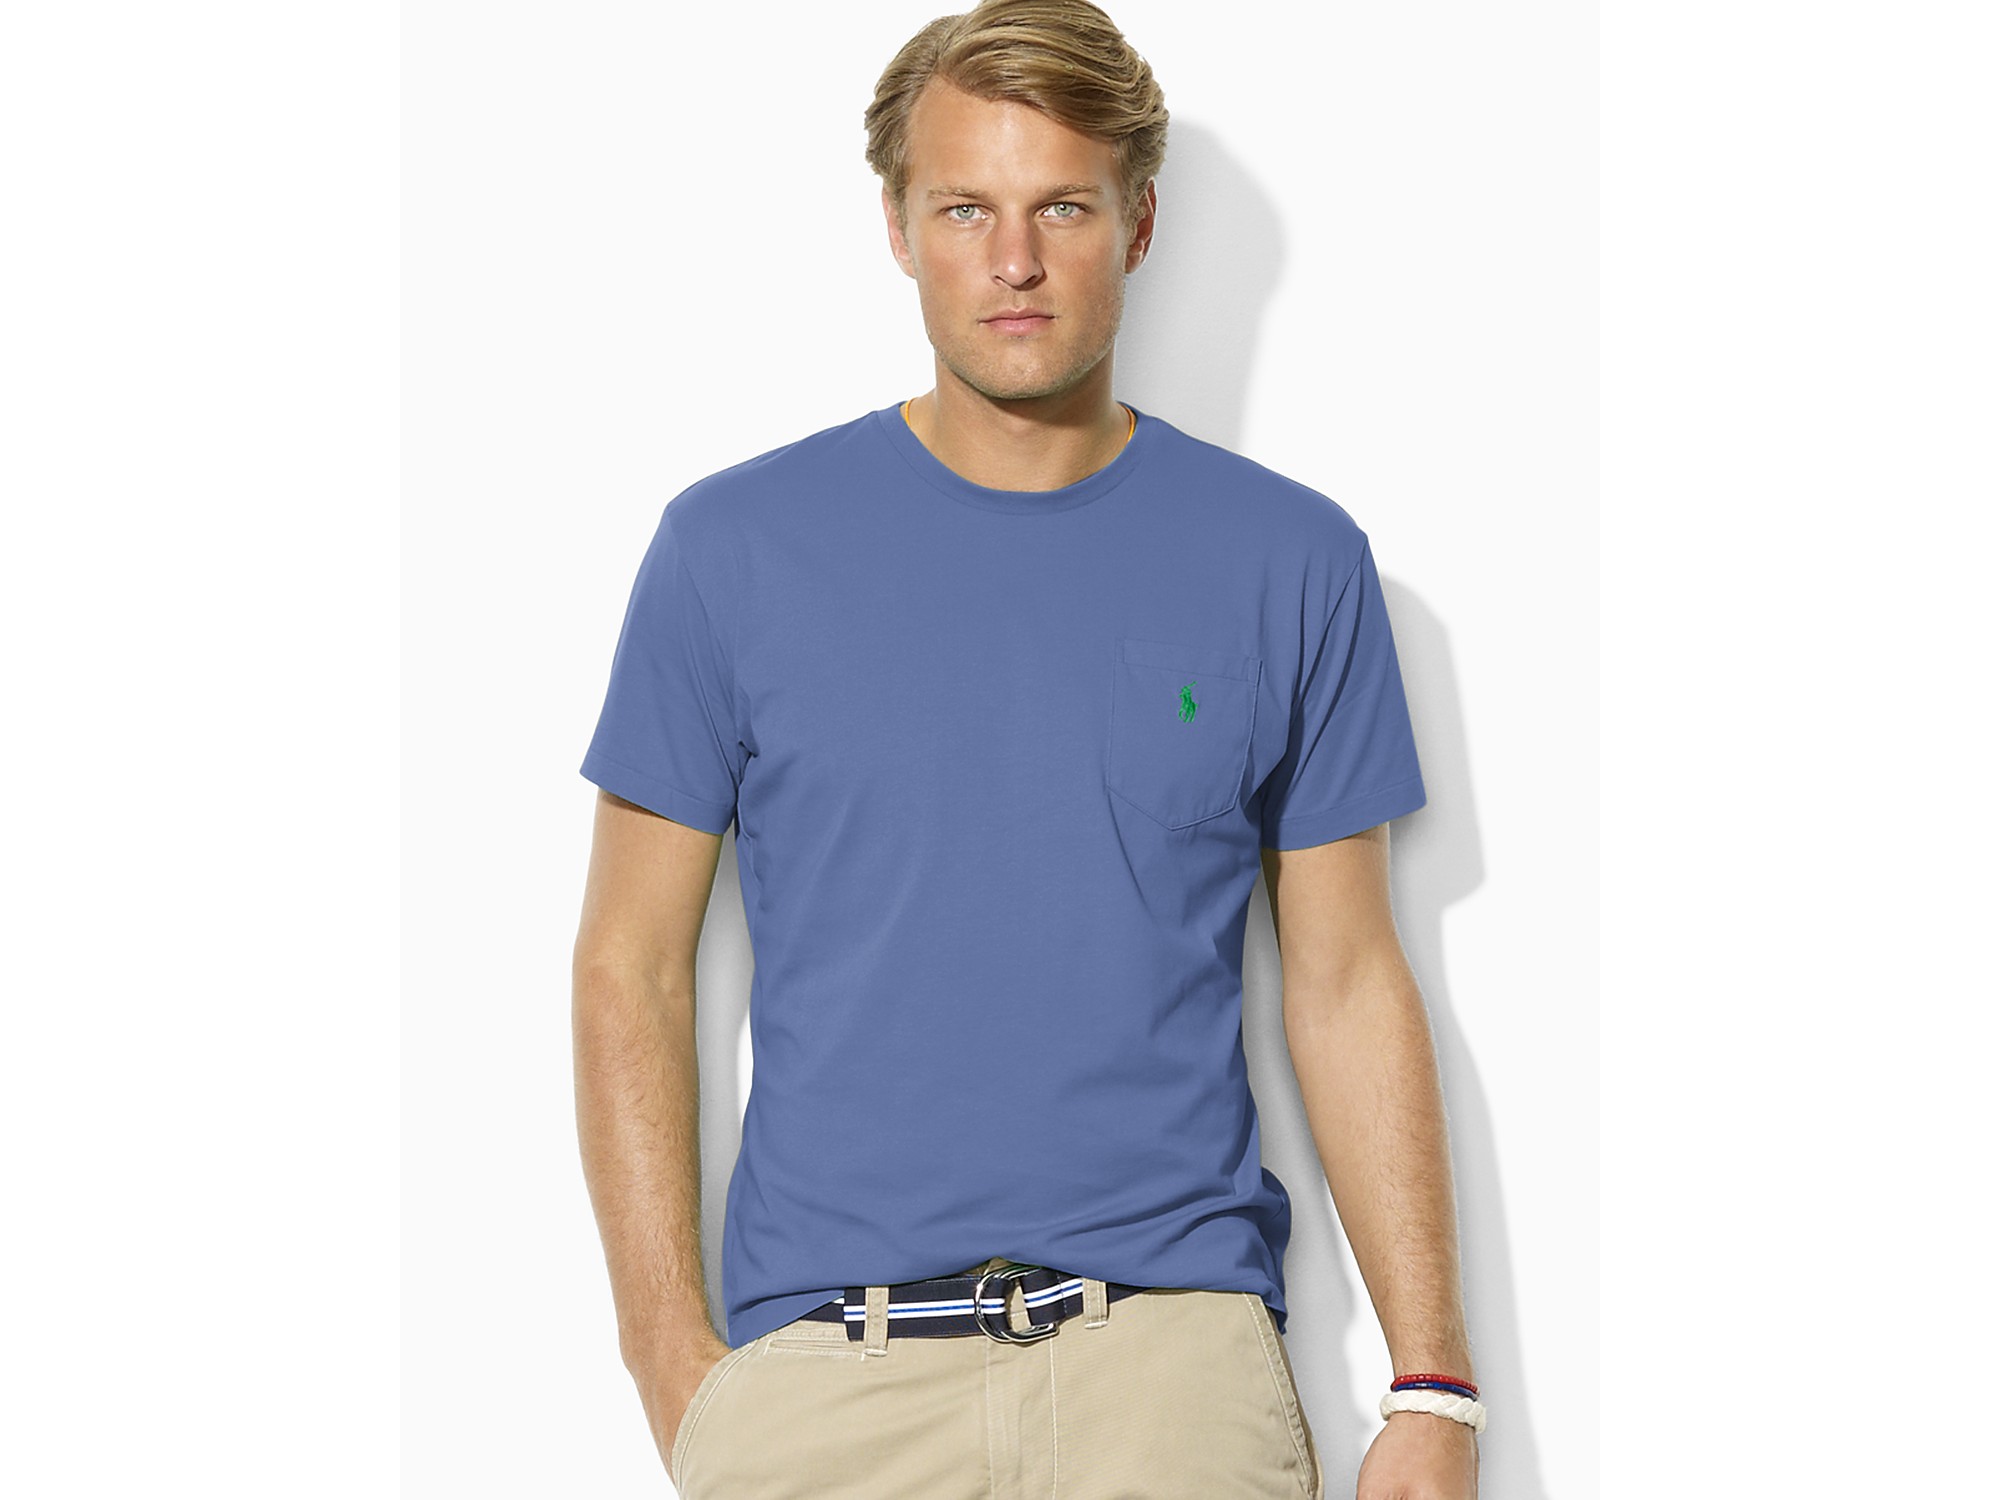 Lyst - Polo Ralph Lauren Classic Fit Short Sleeved Cotton Pocket Tee in ...